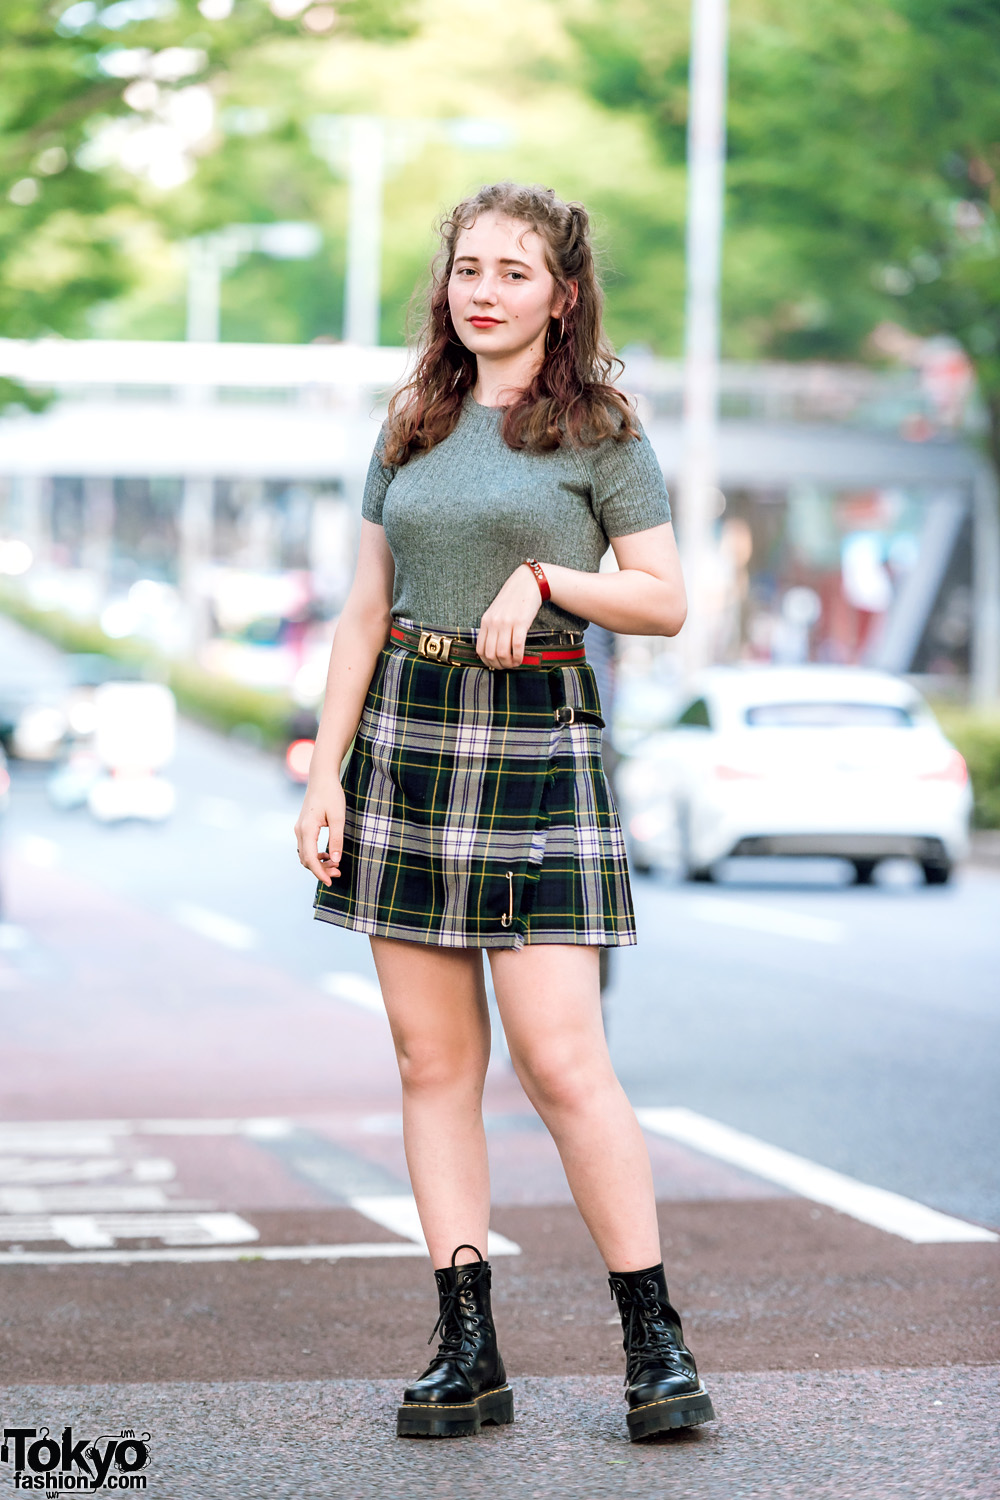 Harajuku Girl Street Style in Tiffany & Co, Gucci, H&M Ribbed Top, Plaid Wrap Around Skirt & Dr. Martens Boots